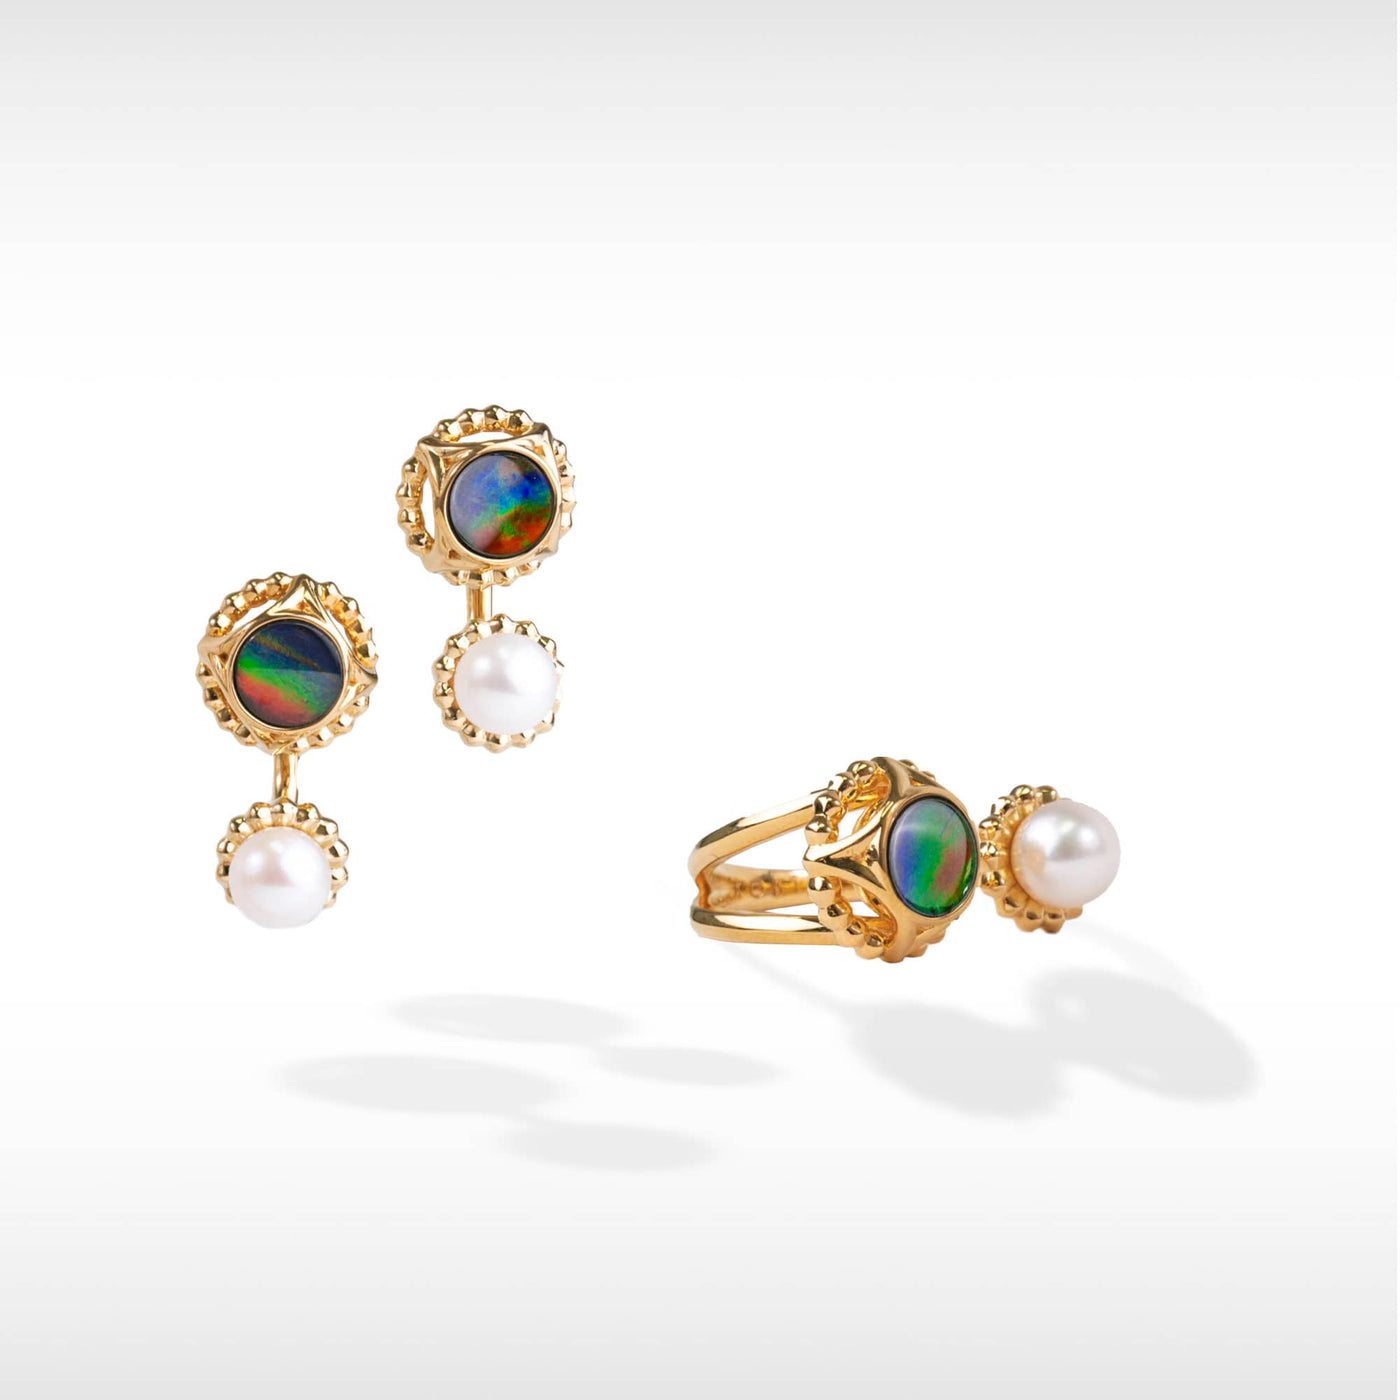 Pearl ammolite earring and ring set in 18K gold plating